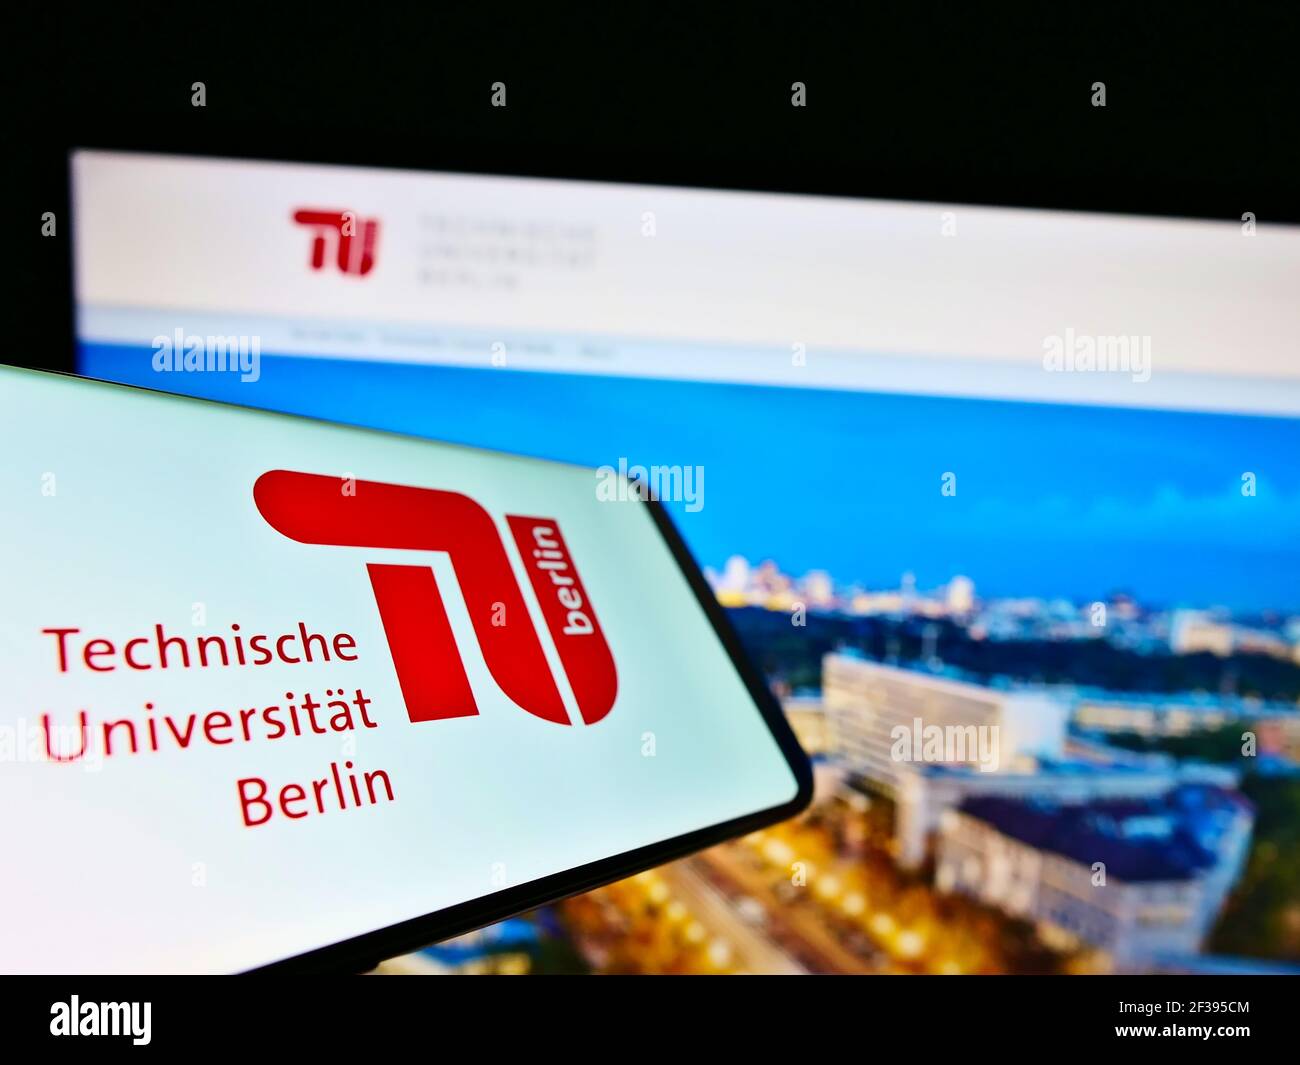 Mobile phone with logo of German education institution Technical University of Berlin on screen in front of website. Focus on center of phone display. Stock Photo